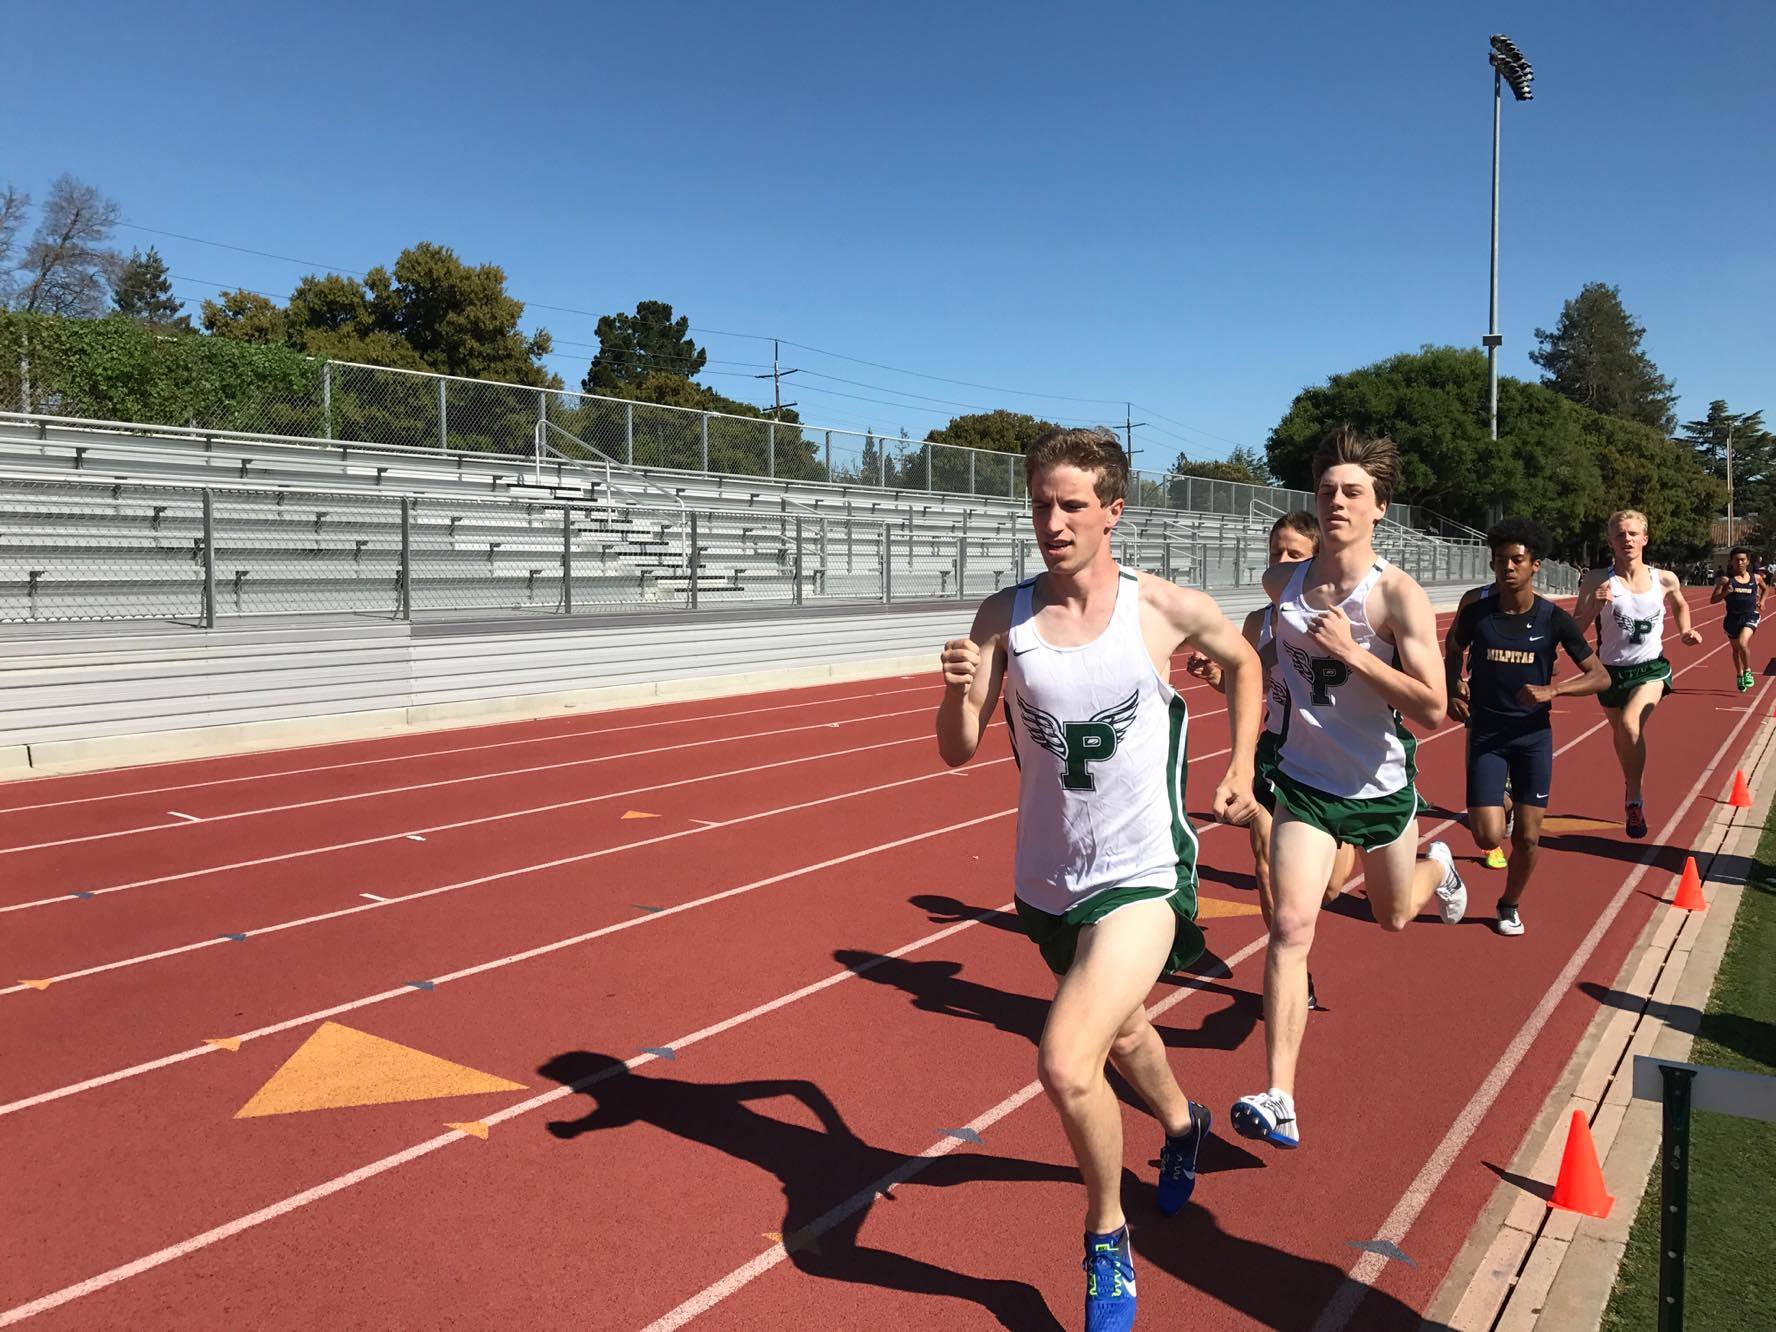 Junior Sam Craig leads the varsity boys' 1600-meter run at the Tuesday afternoon meet versus Milpitas. The boys' varsity team dominated Milpitas, while the other divisions saw closer matchups. "I thought the team did very well overall," junior sprinter Daniel Nemeth said. "The underclassmen have really stepped up." Photo: Jevan Yu.